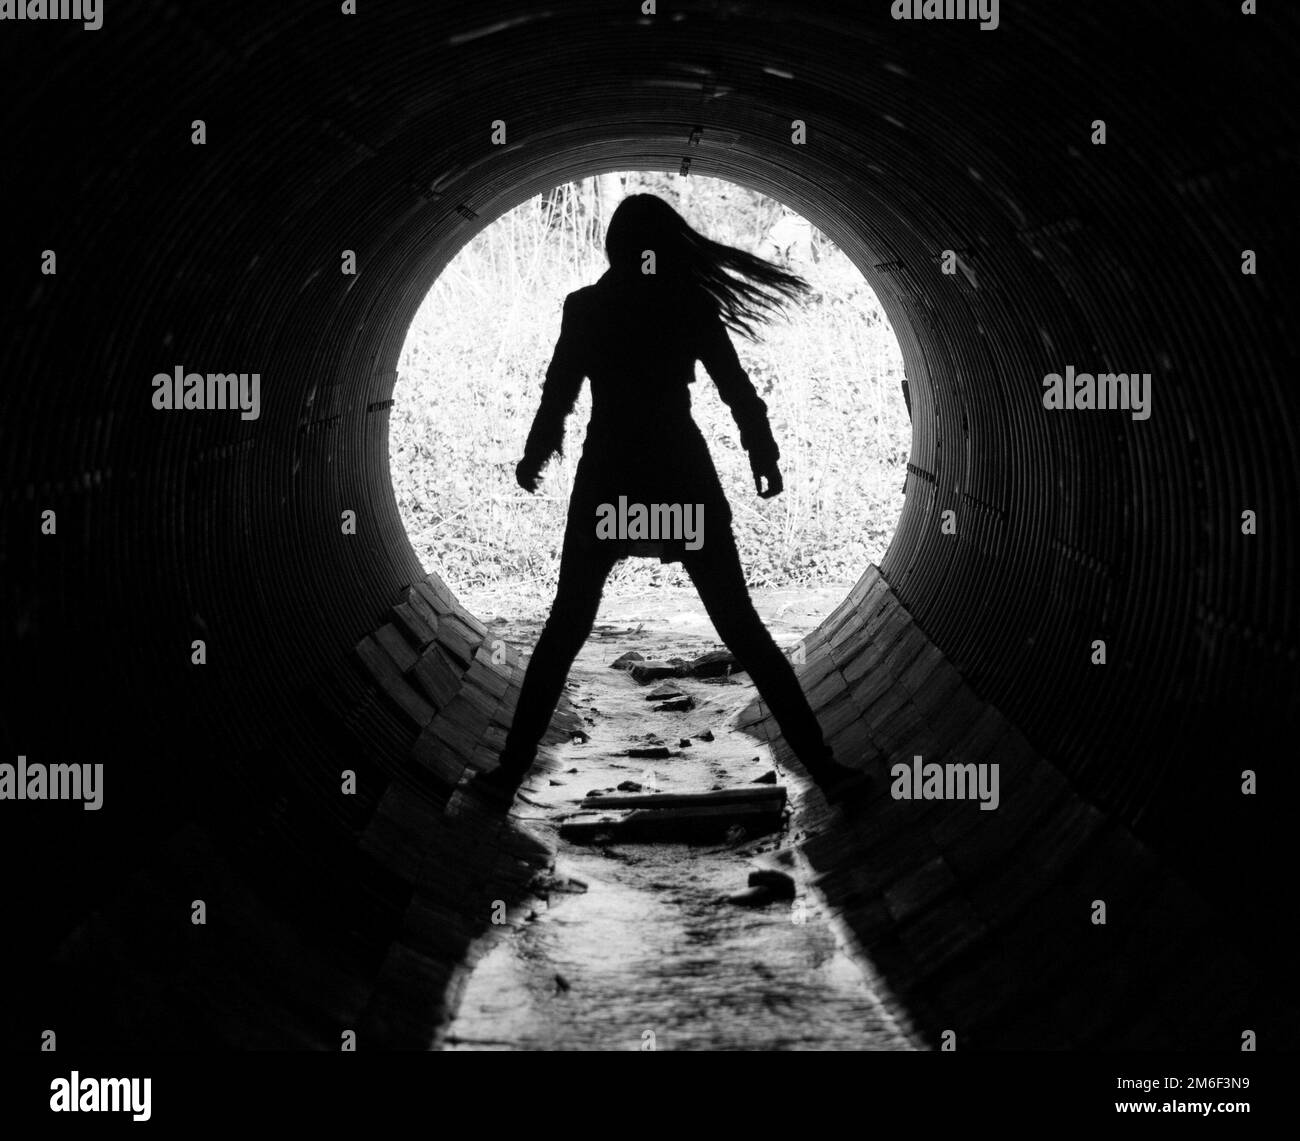 Silhouette of a young woman in the coc of the tunnel. A sewer tunnel under the road. Stock Photo